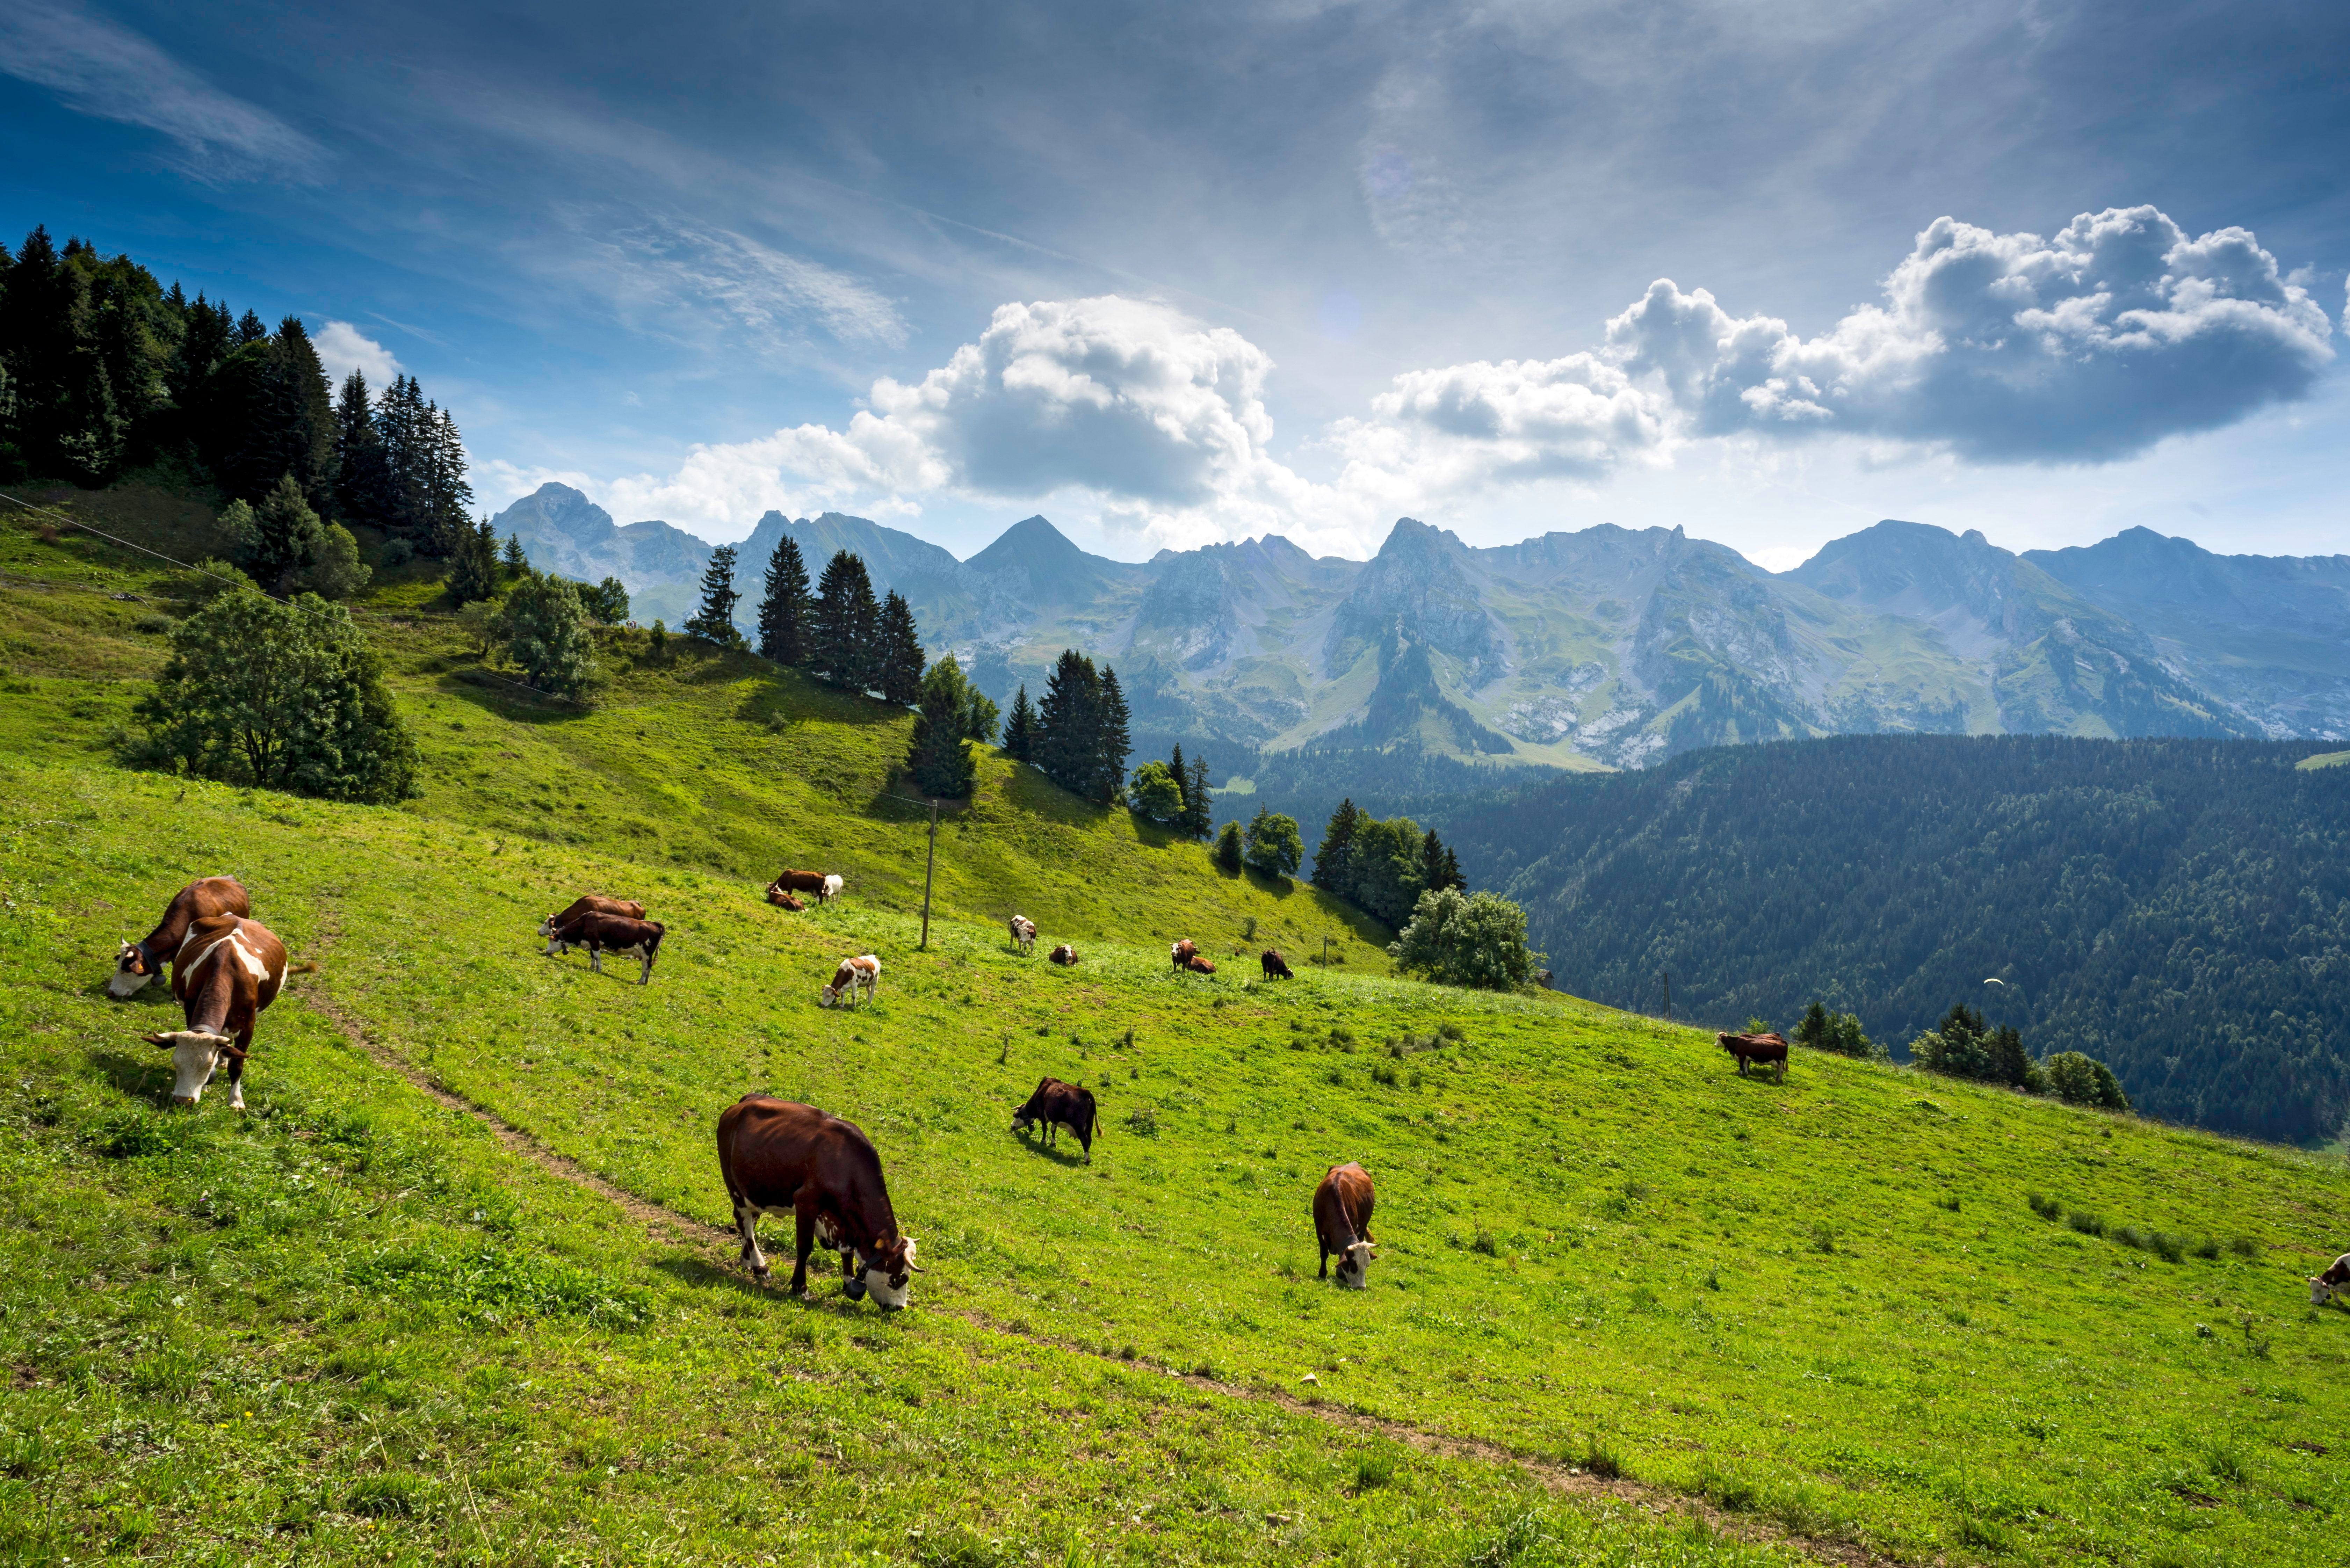 Cows grazing in altitude on an Alpine meadow above the Village of Le Grand-Bornand, near the Aravis Mountain Range, Haute Savoie, France